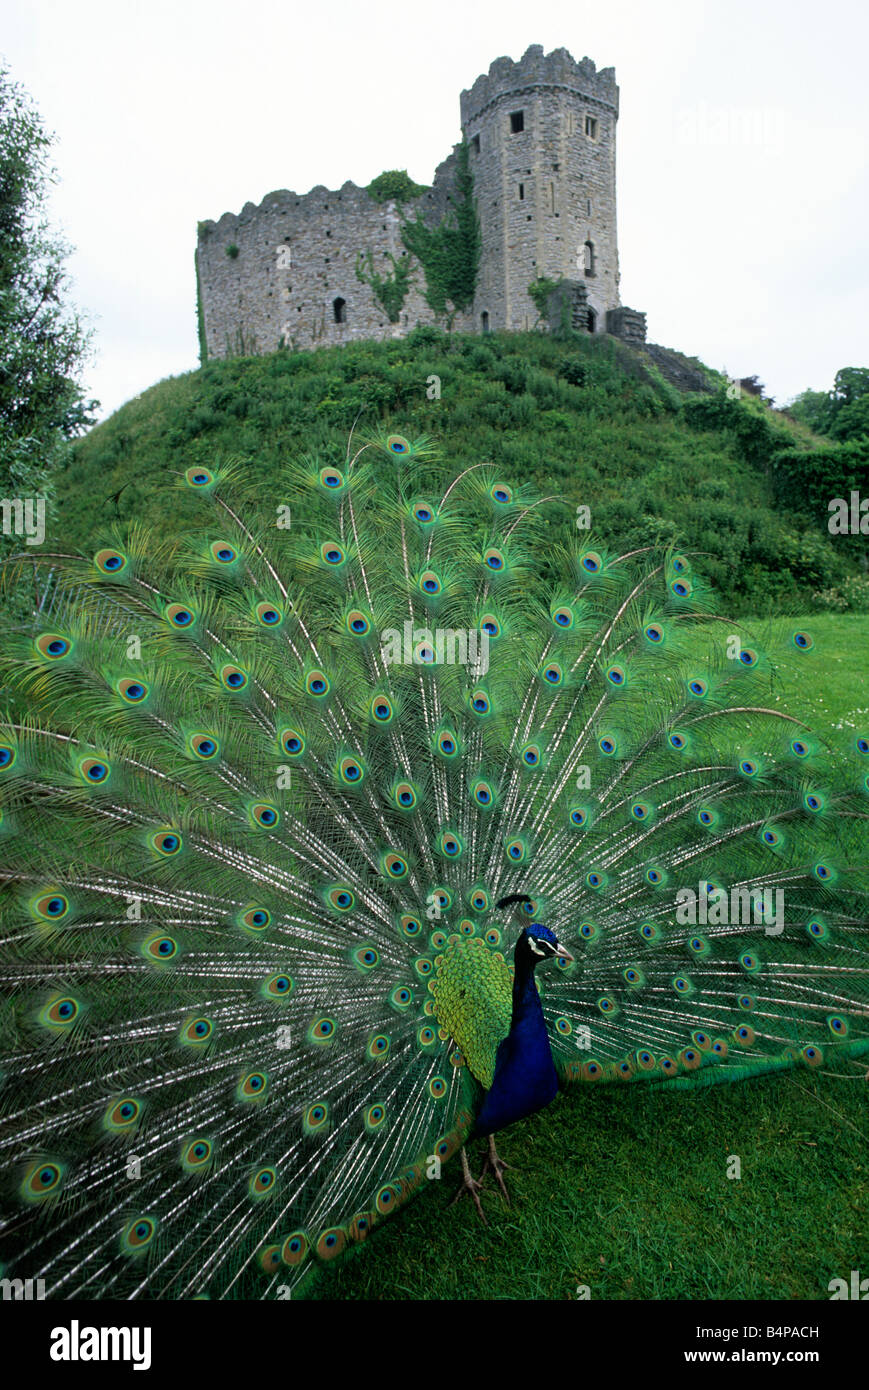 Peacock with its tail feathers fully extended, with Norman keep, Cardiff Castle in the background  Wales, UK Stock Photo